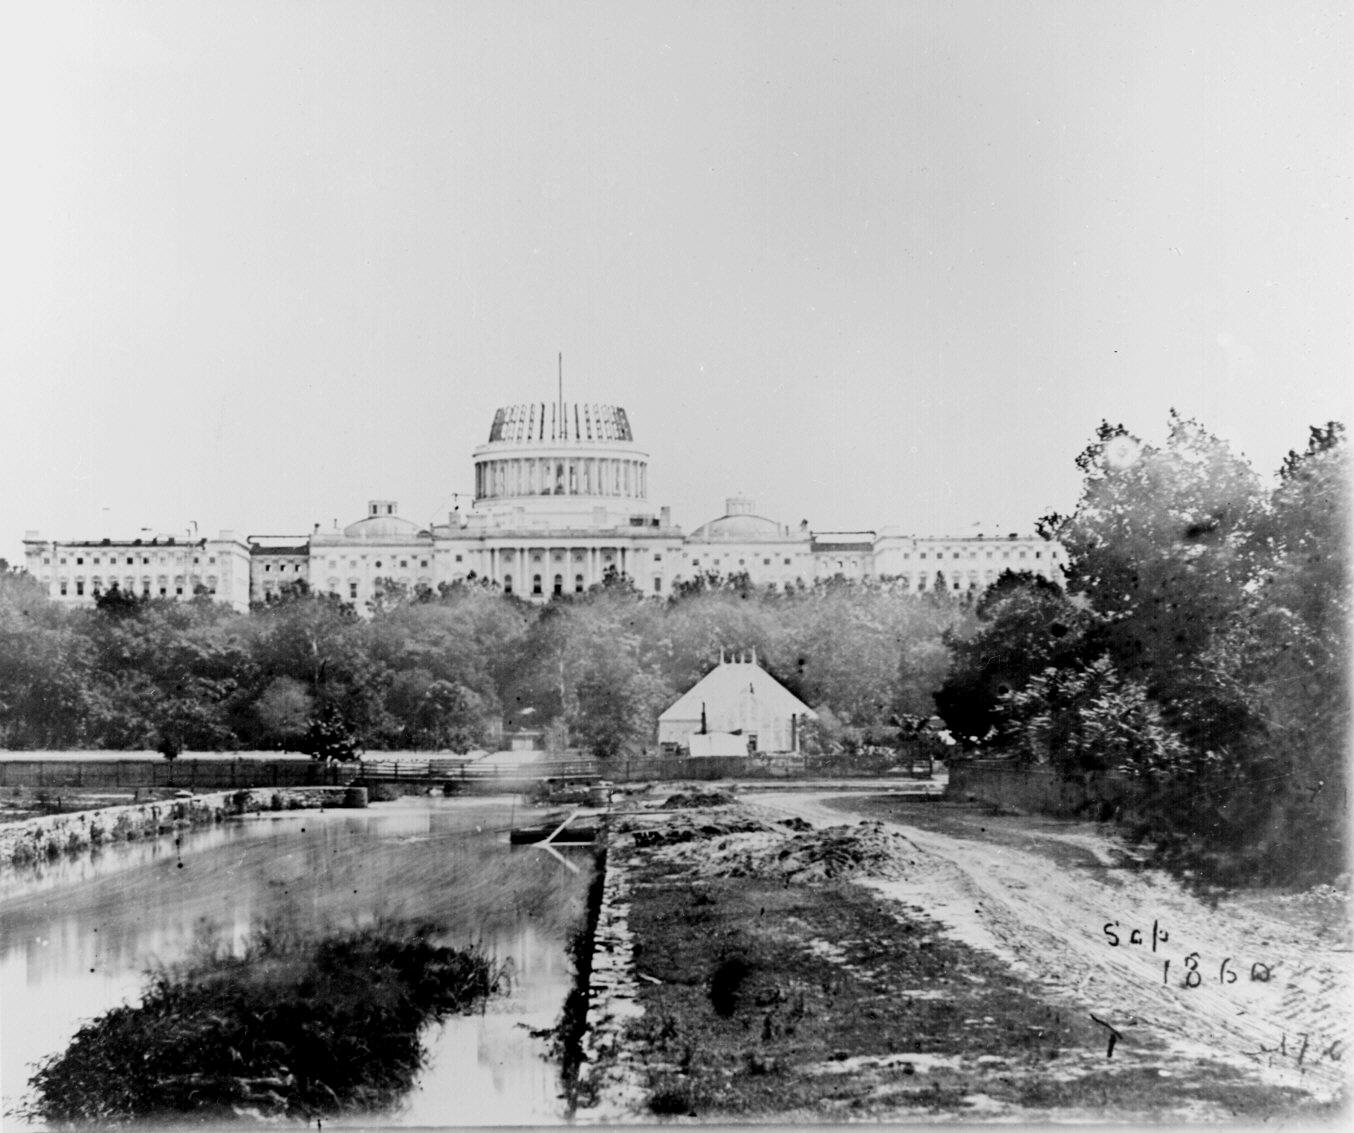 The US Capitol building is shown under construction in 1860. President Abraham Lincoln directed that work continue through the Civil War.